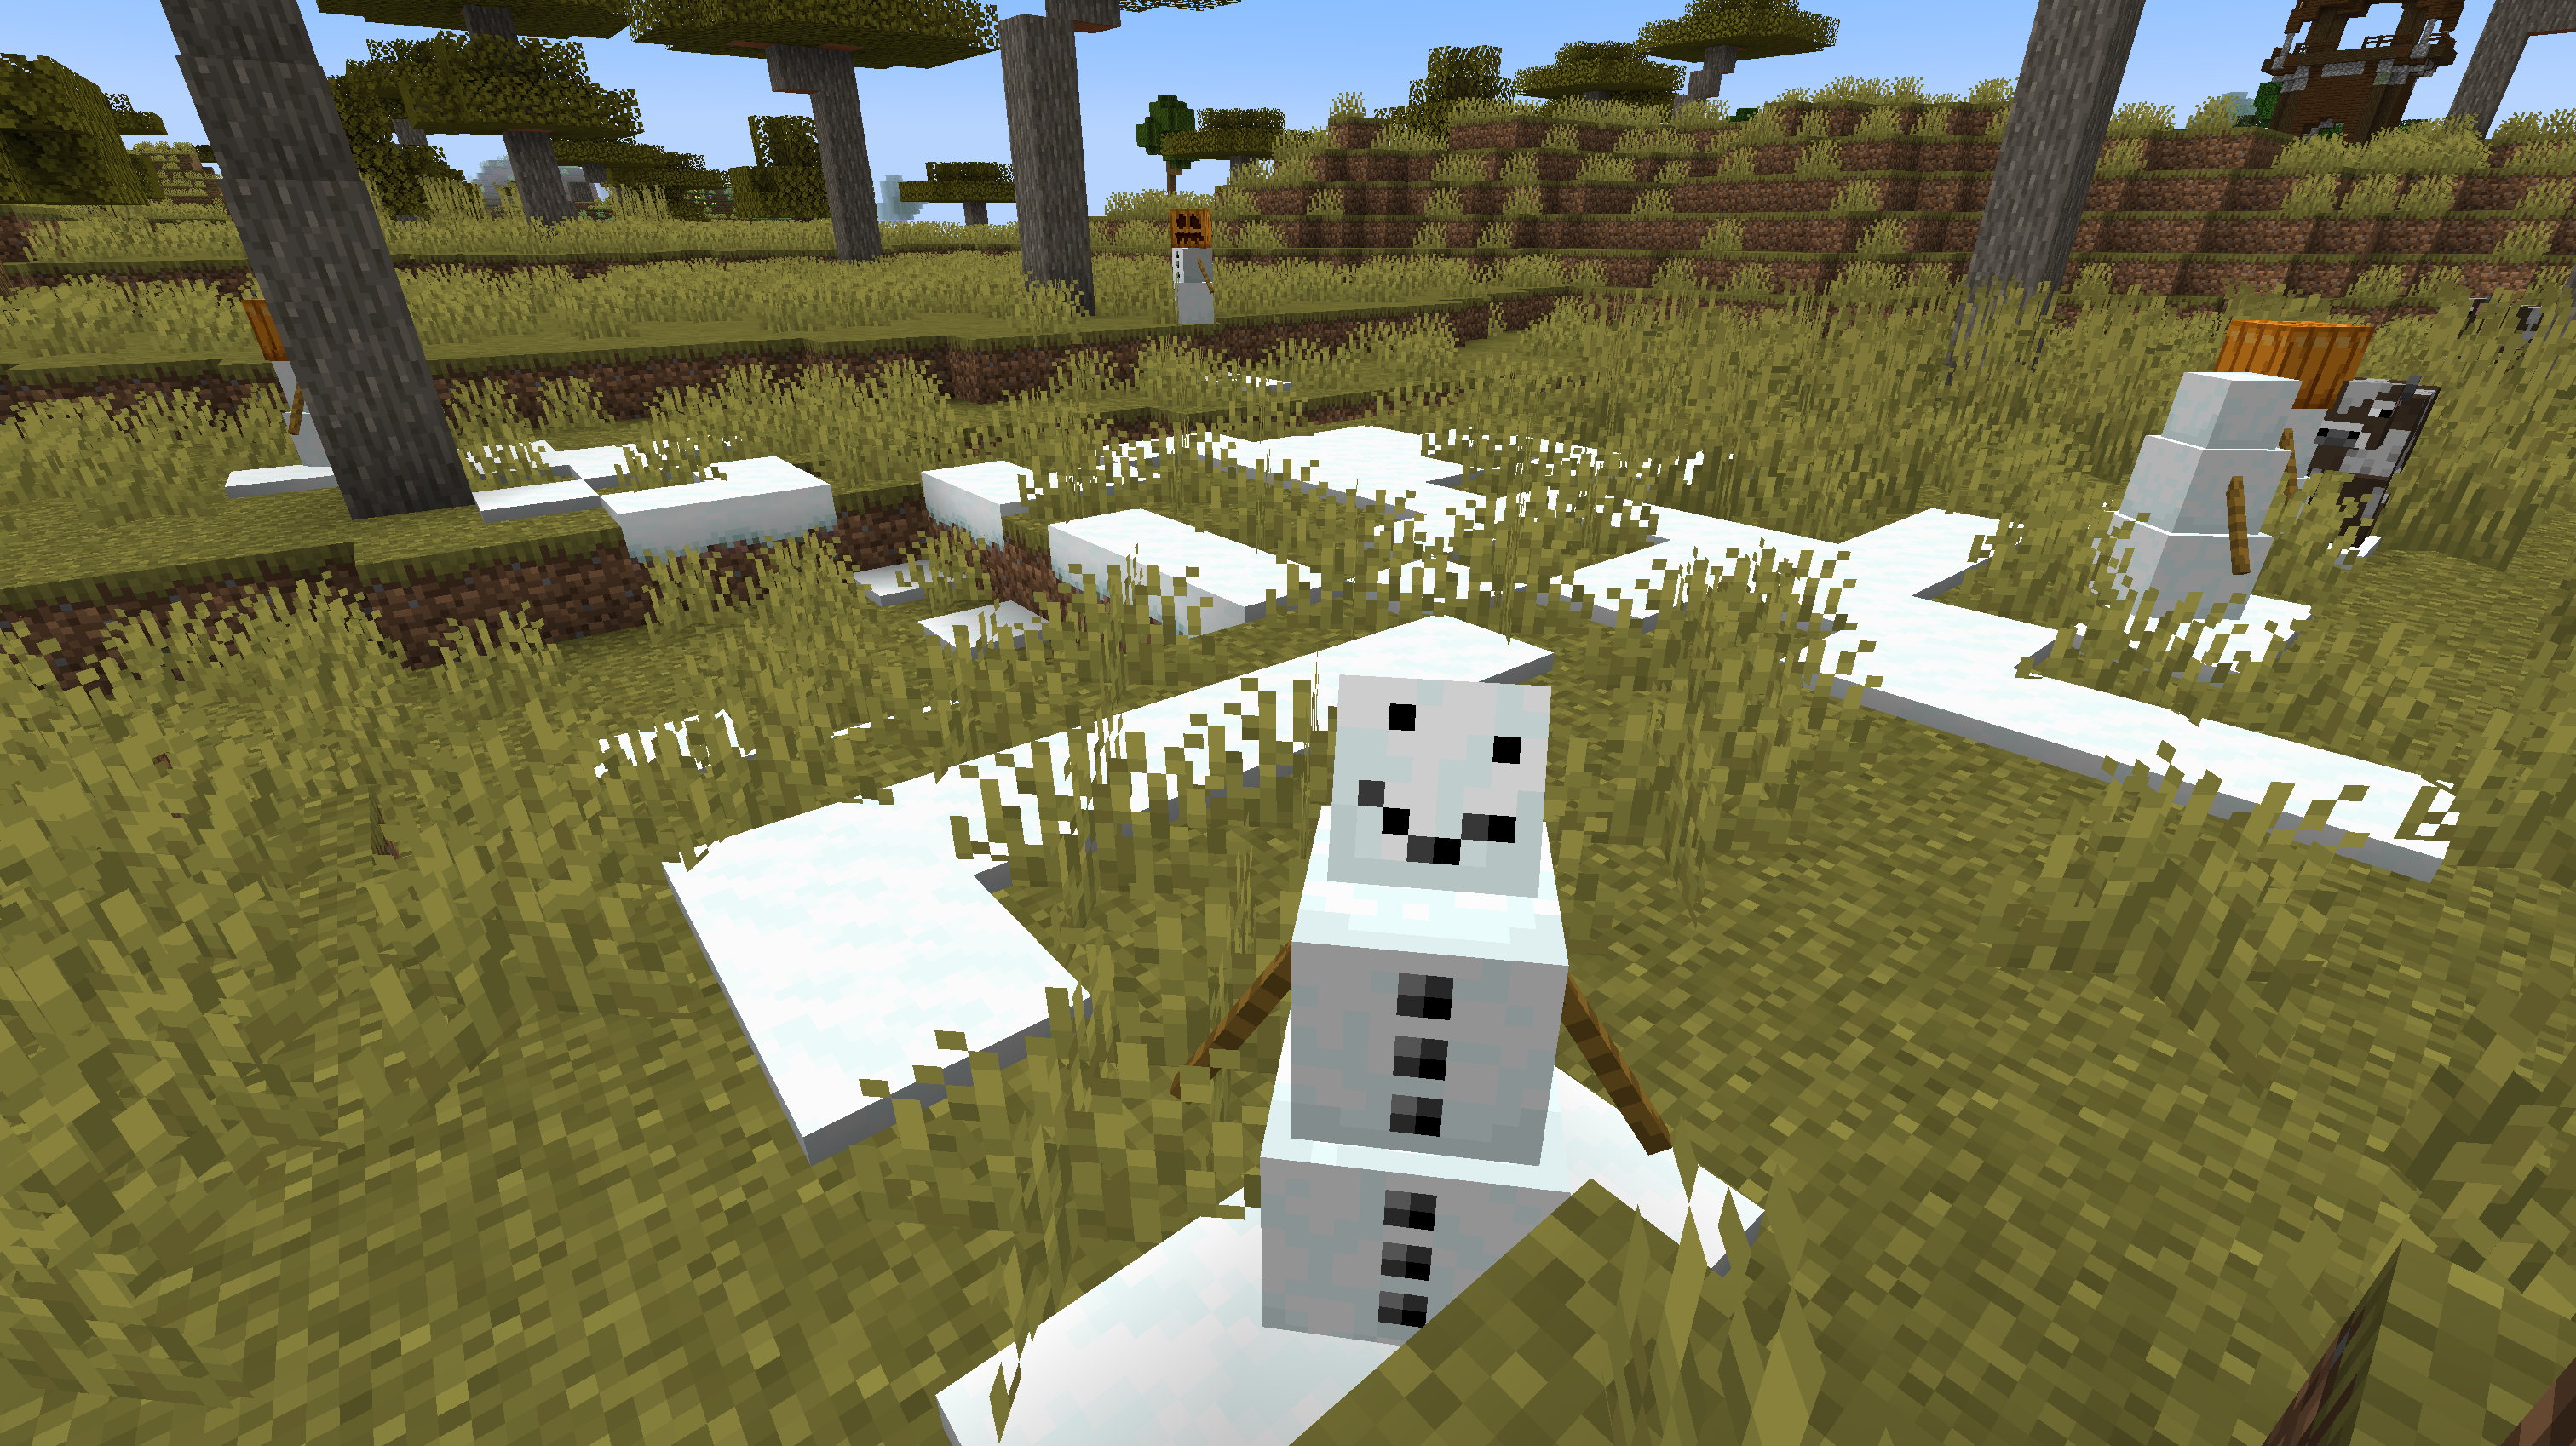 Snow golems happily living in a Savanna biome